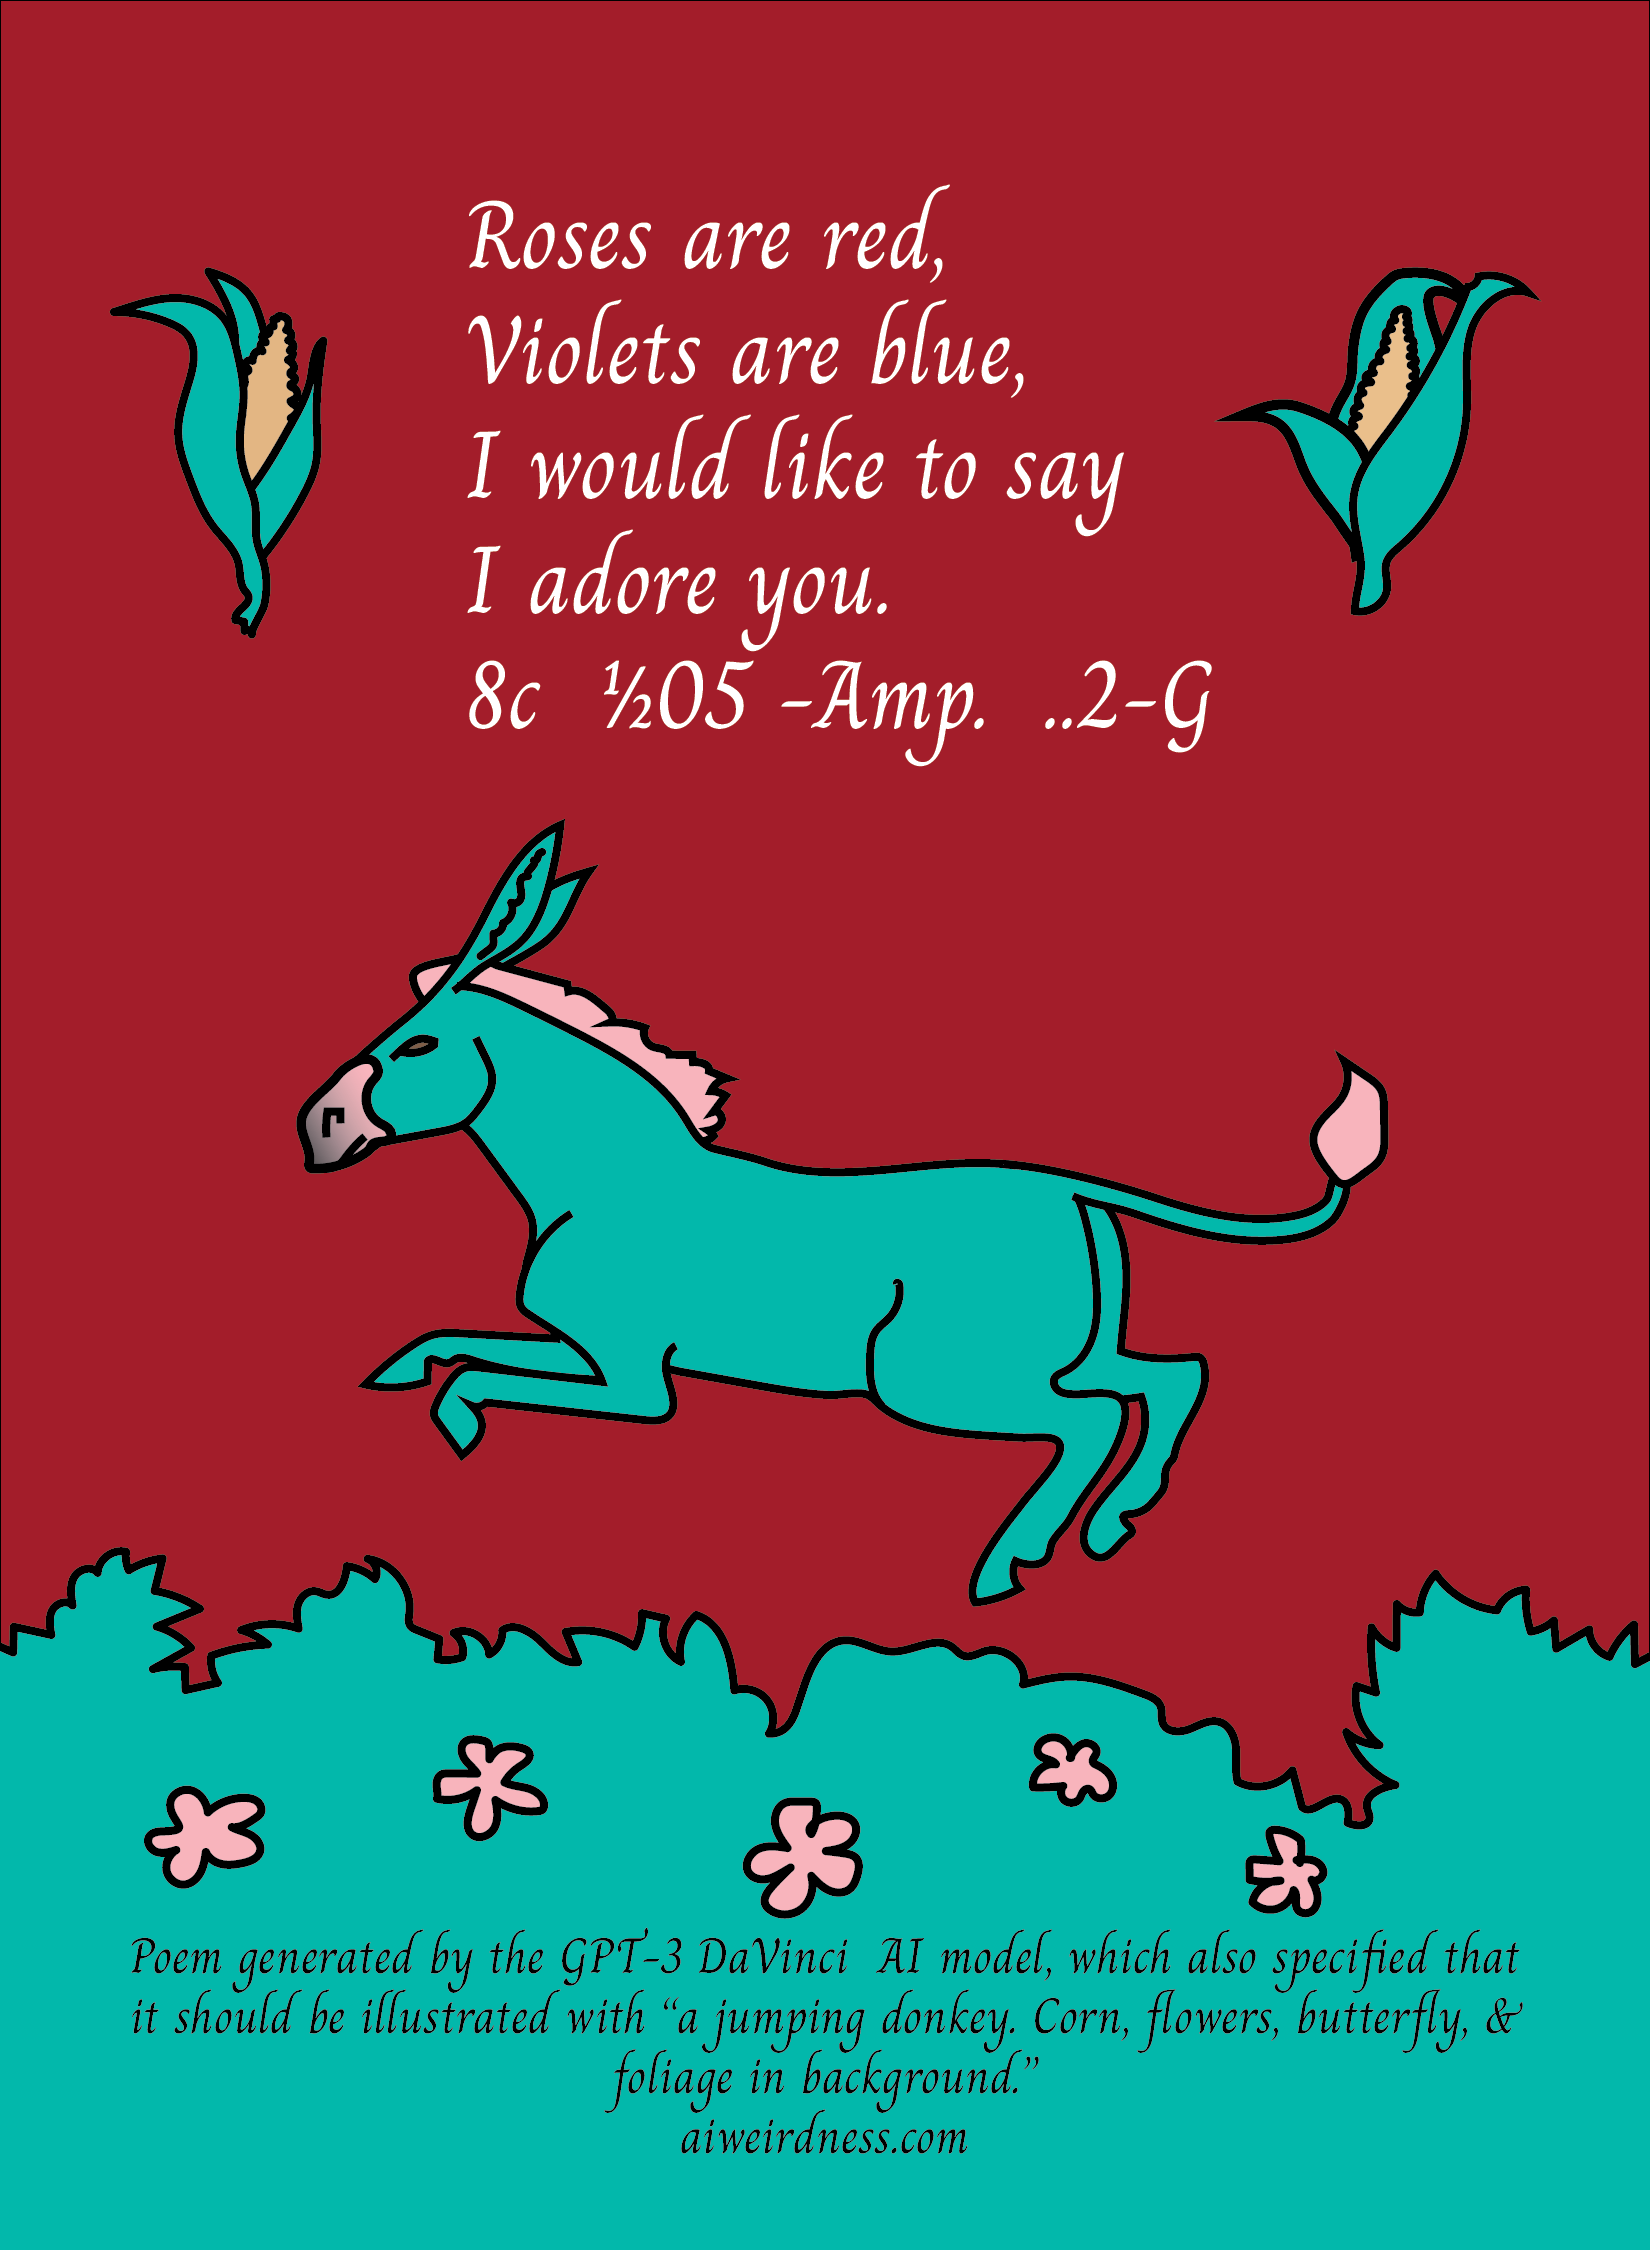 Roses are red, Violets are blue, I would like to say; I adore you. 8c  ½05 -Amp.  ..2-G. Illustration is of a jumping donkey.  Corn, flowers, butterfly, & foliage in background.